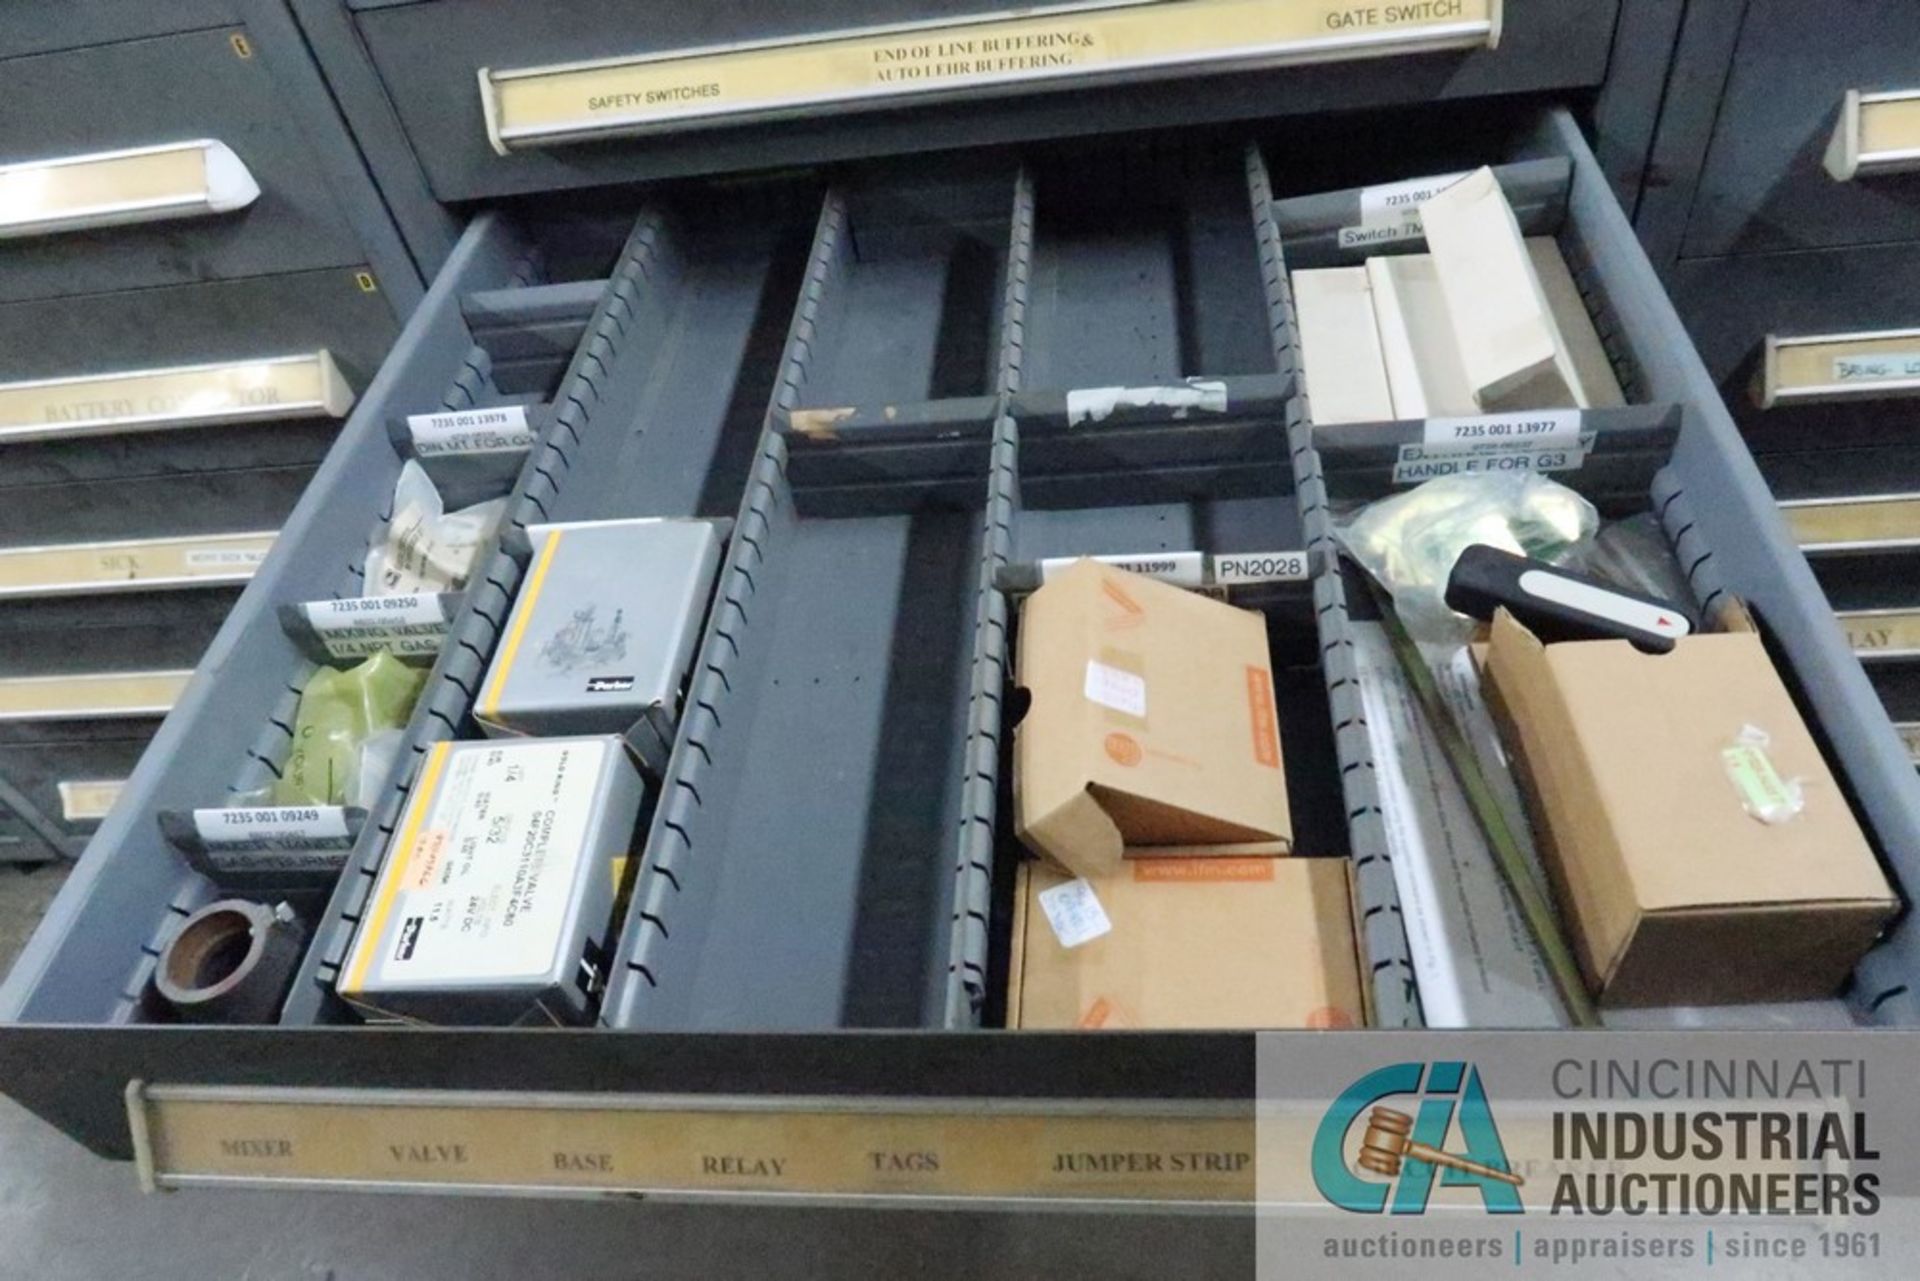 9-DRAWER LISTA CABINET WITH CONTENTS INCLUDING MISCELLANEOUS GAS VALVES, IGNITERS, SWITCHES, PHOTO - Image 7 of 10